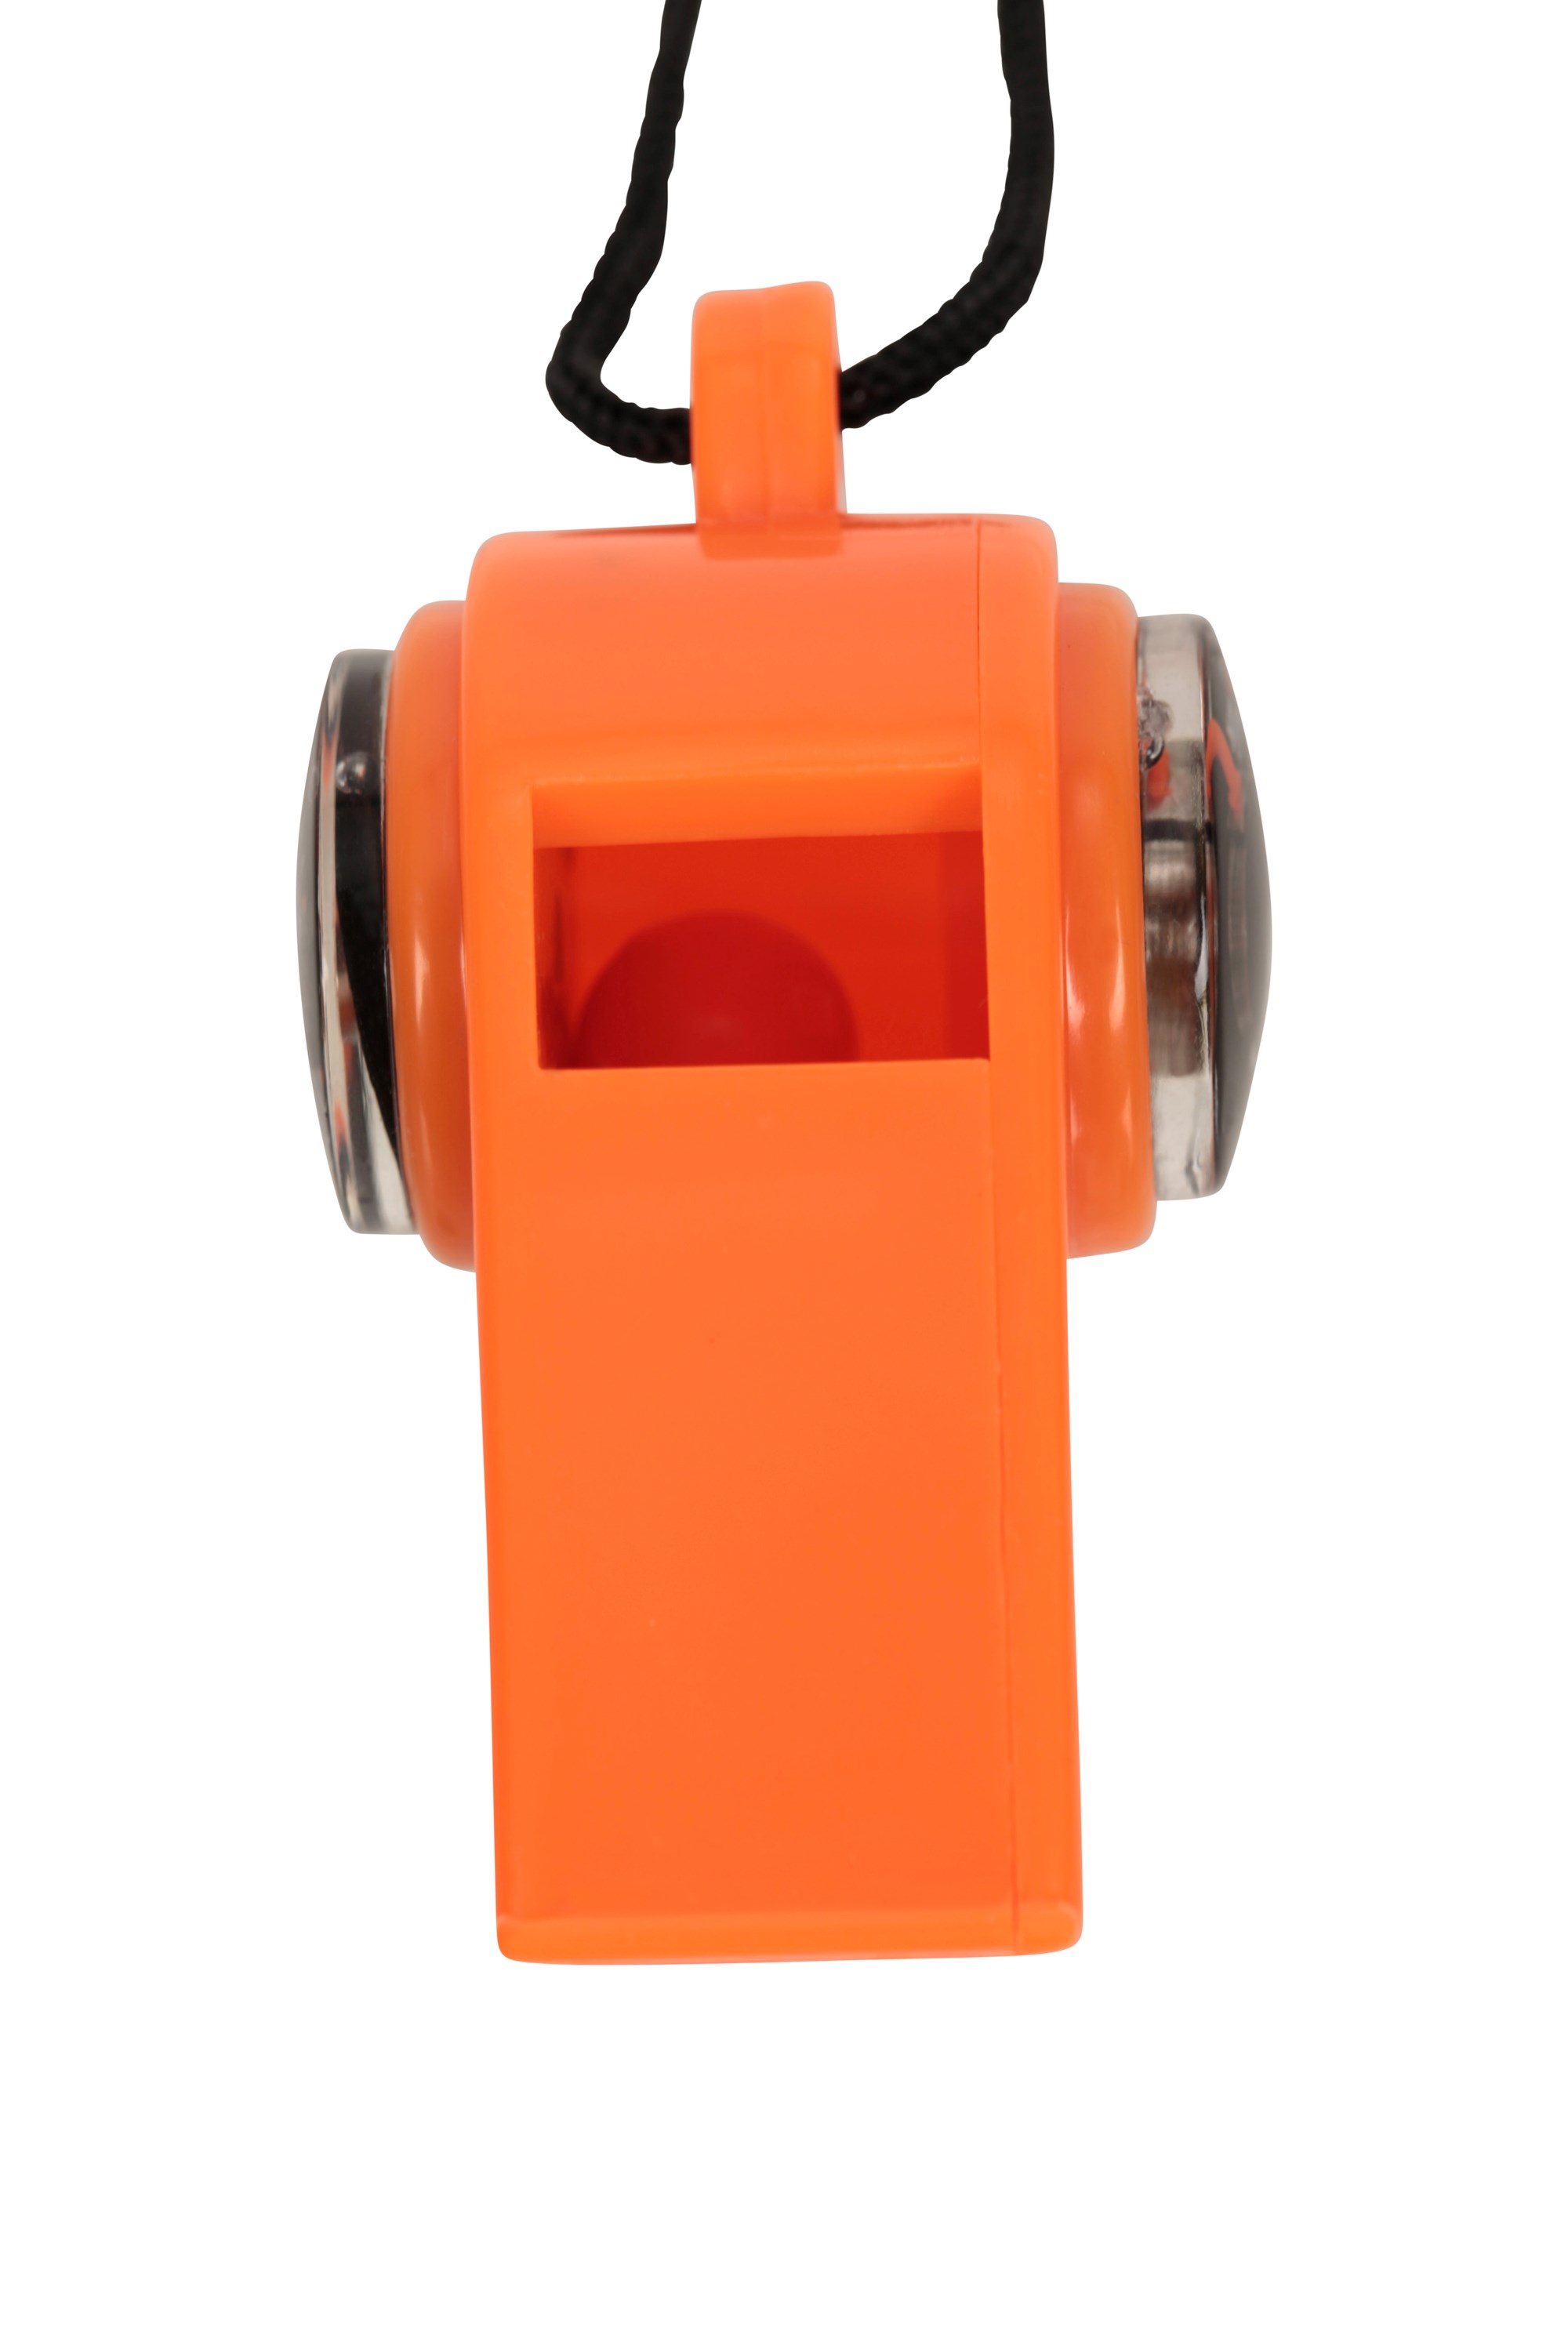 https://img.cdn.mountainwarehouse.com/product/022435/022435_ora_3_in_1_emergency_whistle_with_compass_har_aw23_03.jpg